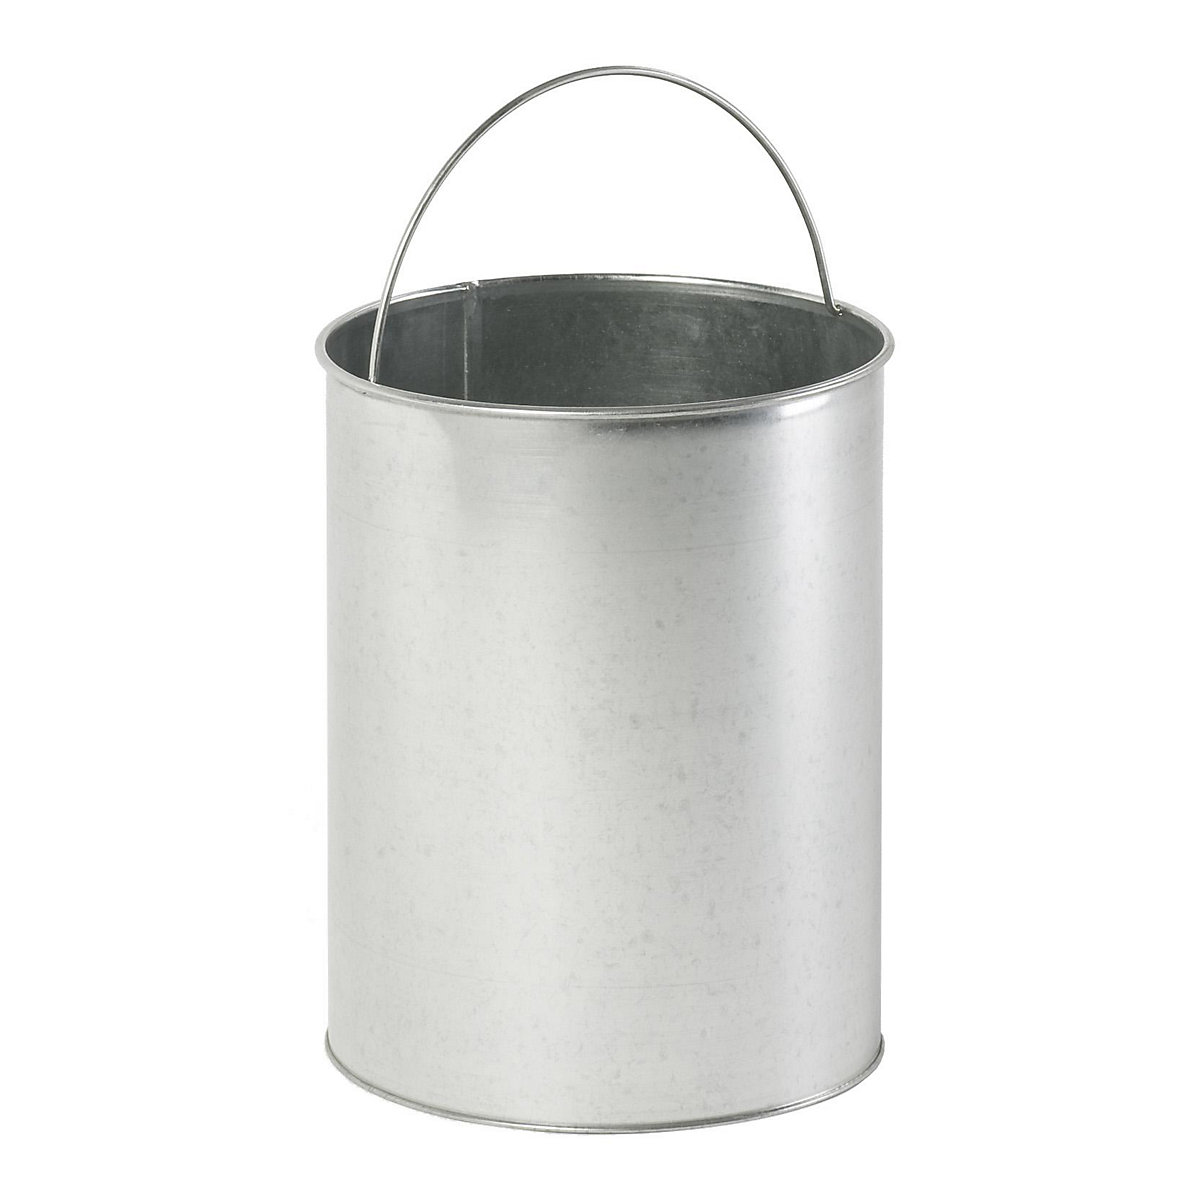 Zinc plated inner container